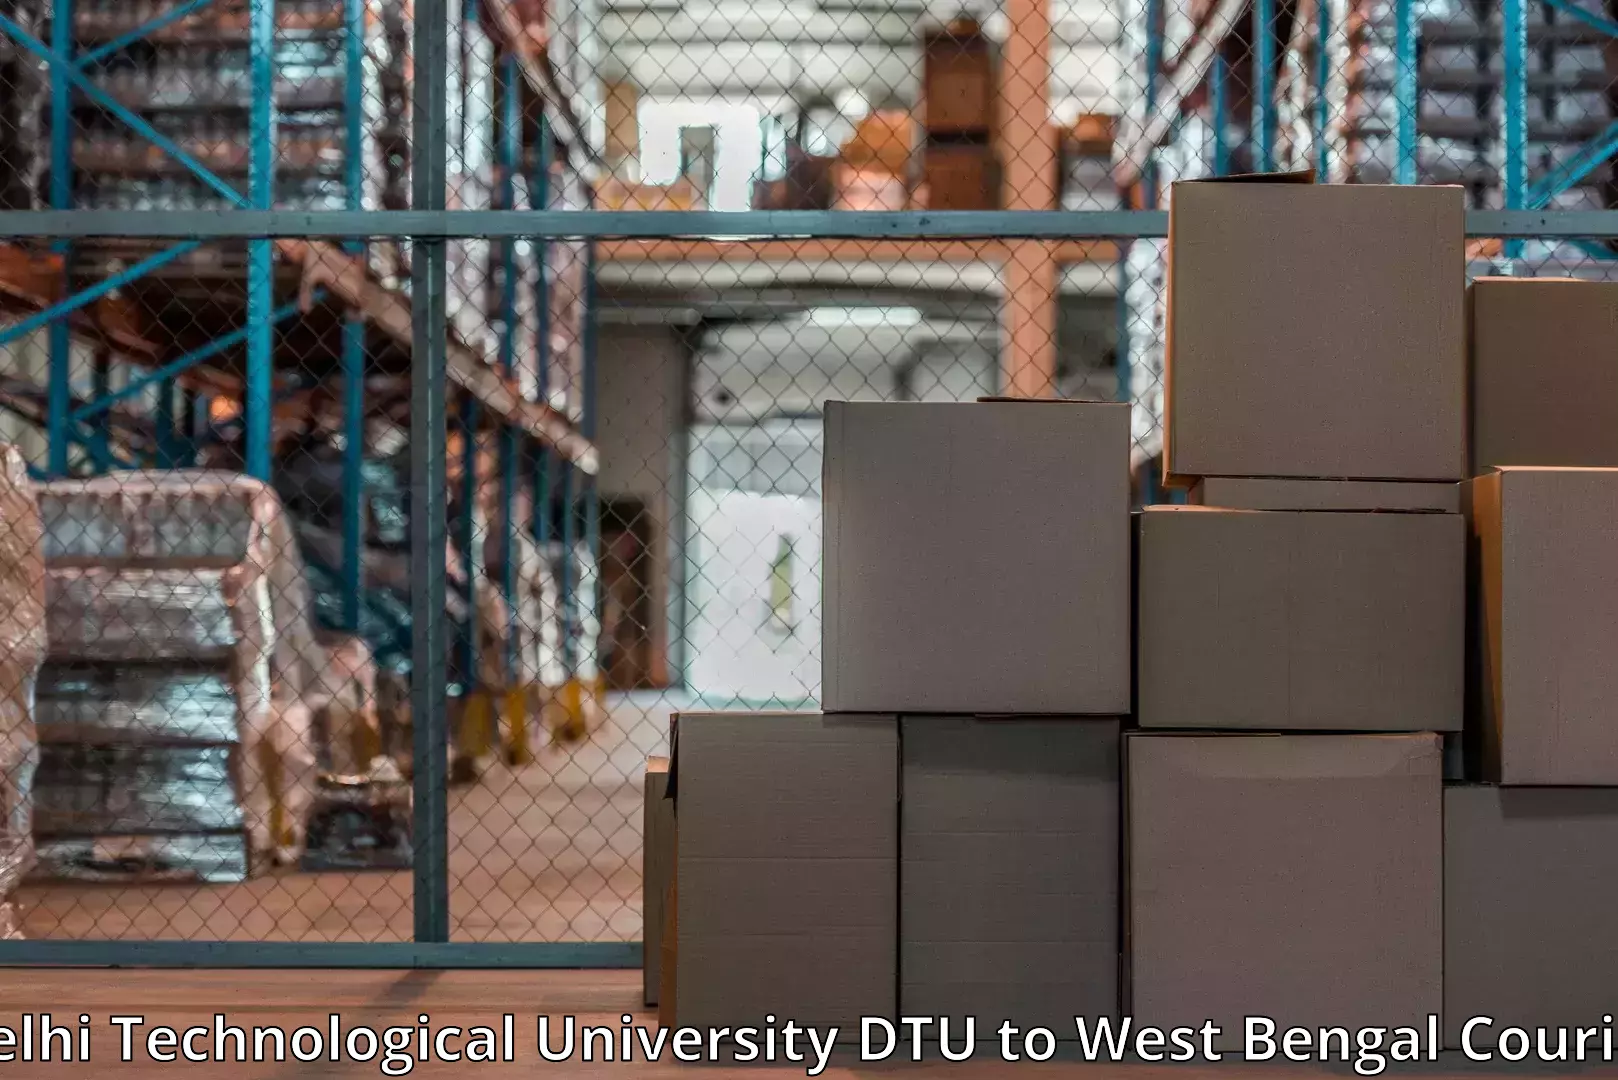 Packing and moving services in Delhi Technological University DTU to Raidighi